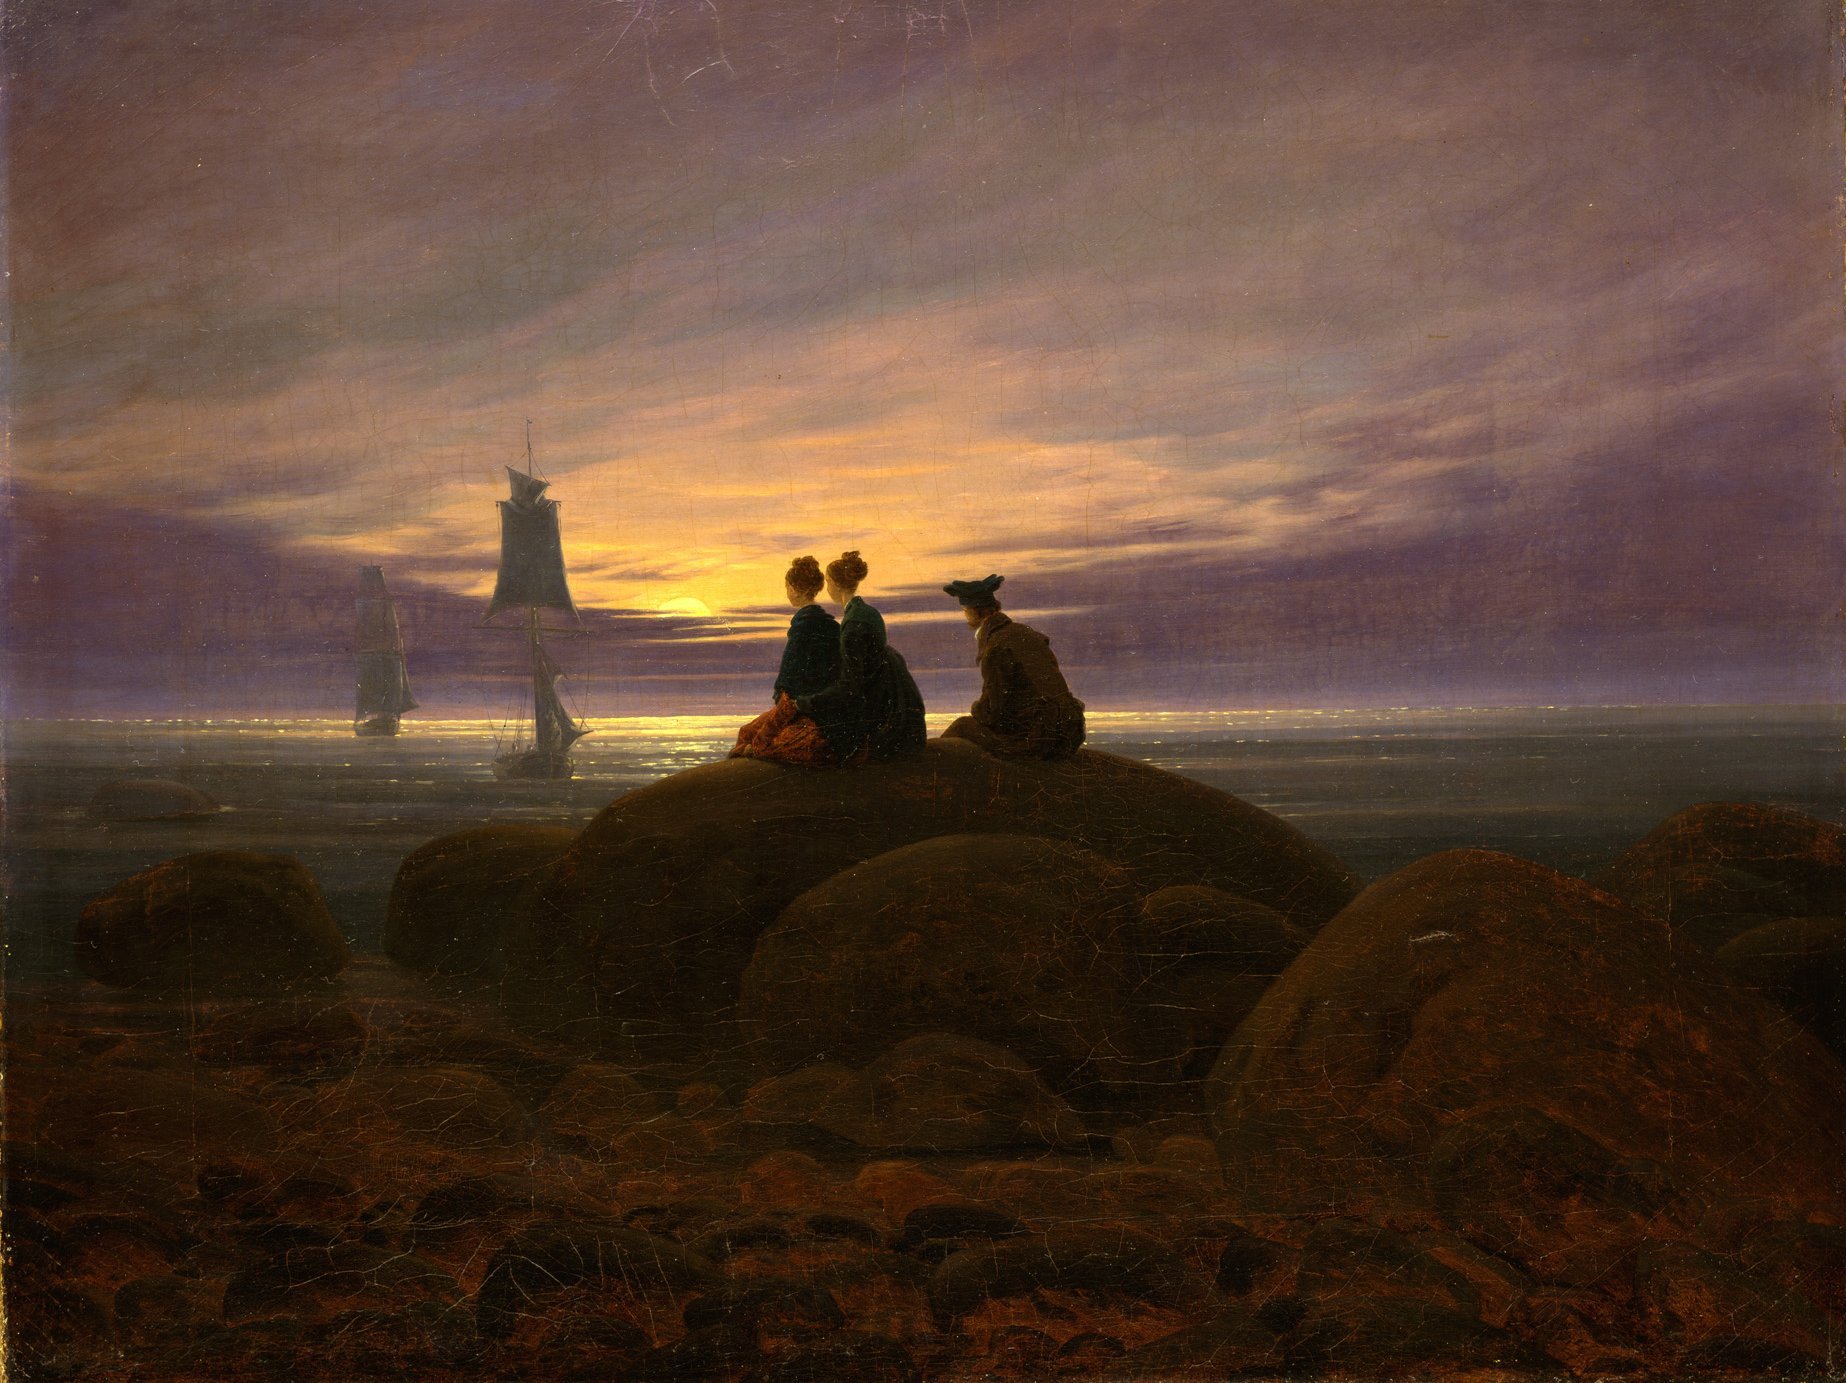 Painting: Three people sitting on a rock in front of a body of water at dusk. Sailing boats pass by on the water.